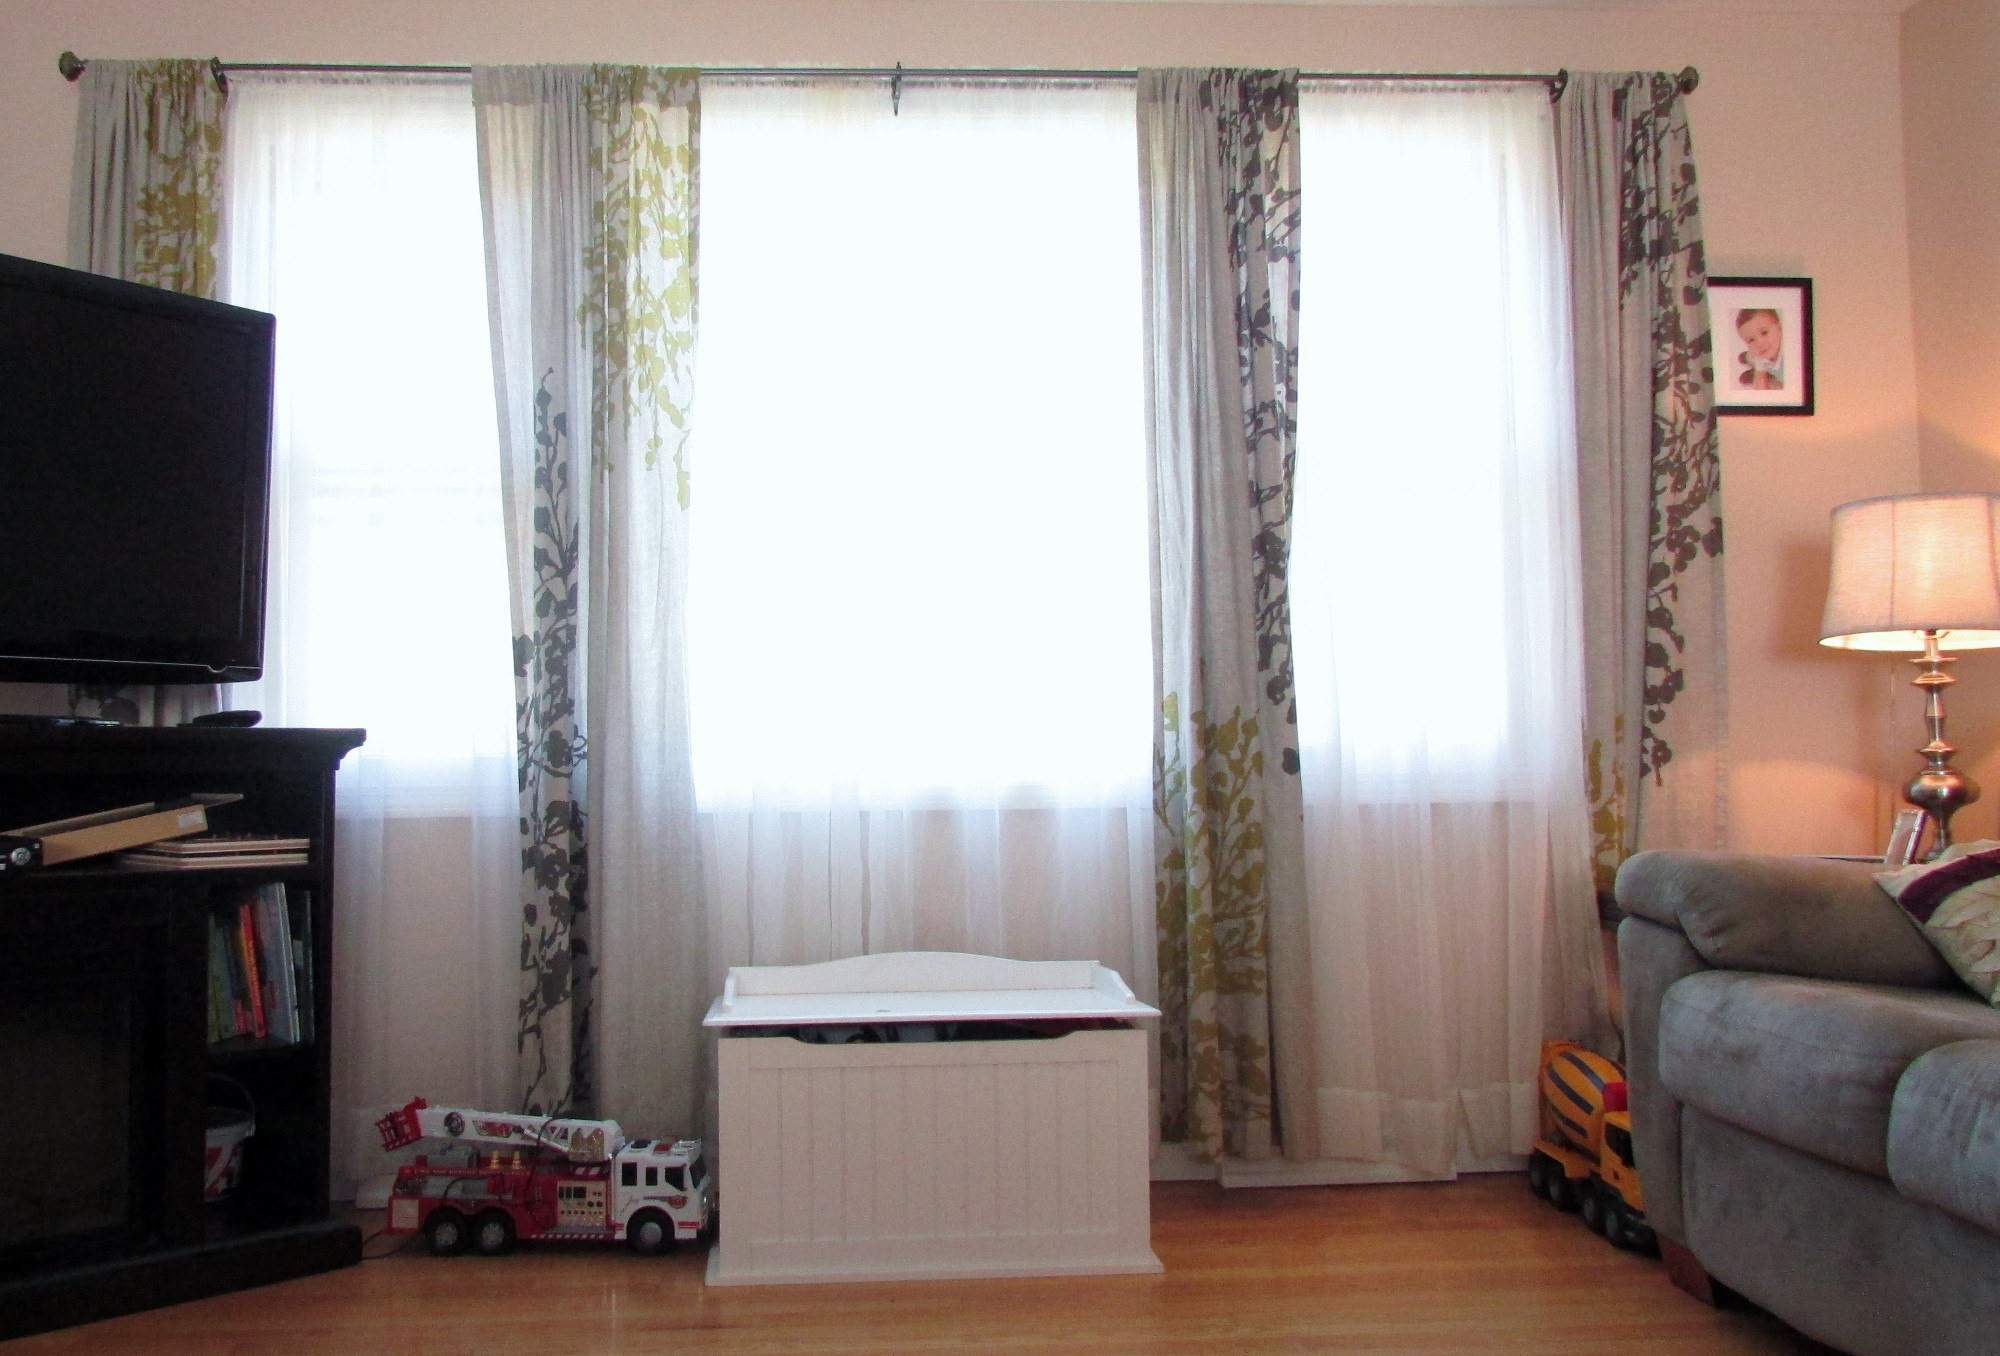 Living Room Window Curtains
 How to Choose the Right Window Treatments for Wide Windows